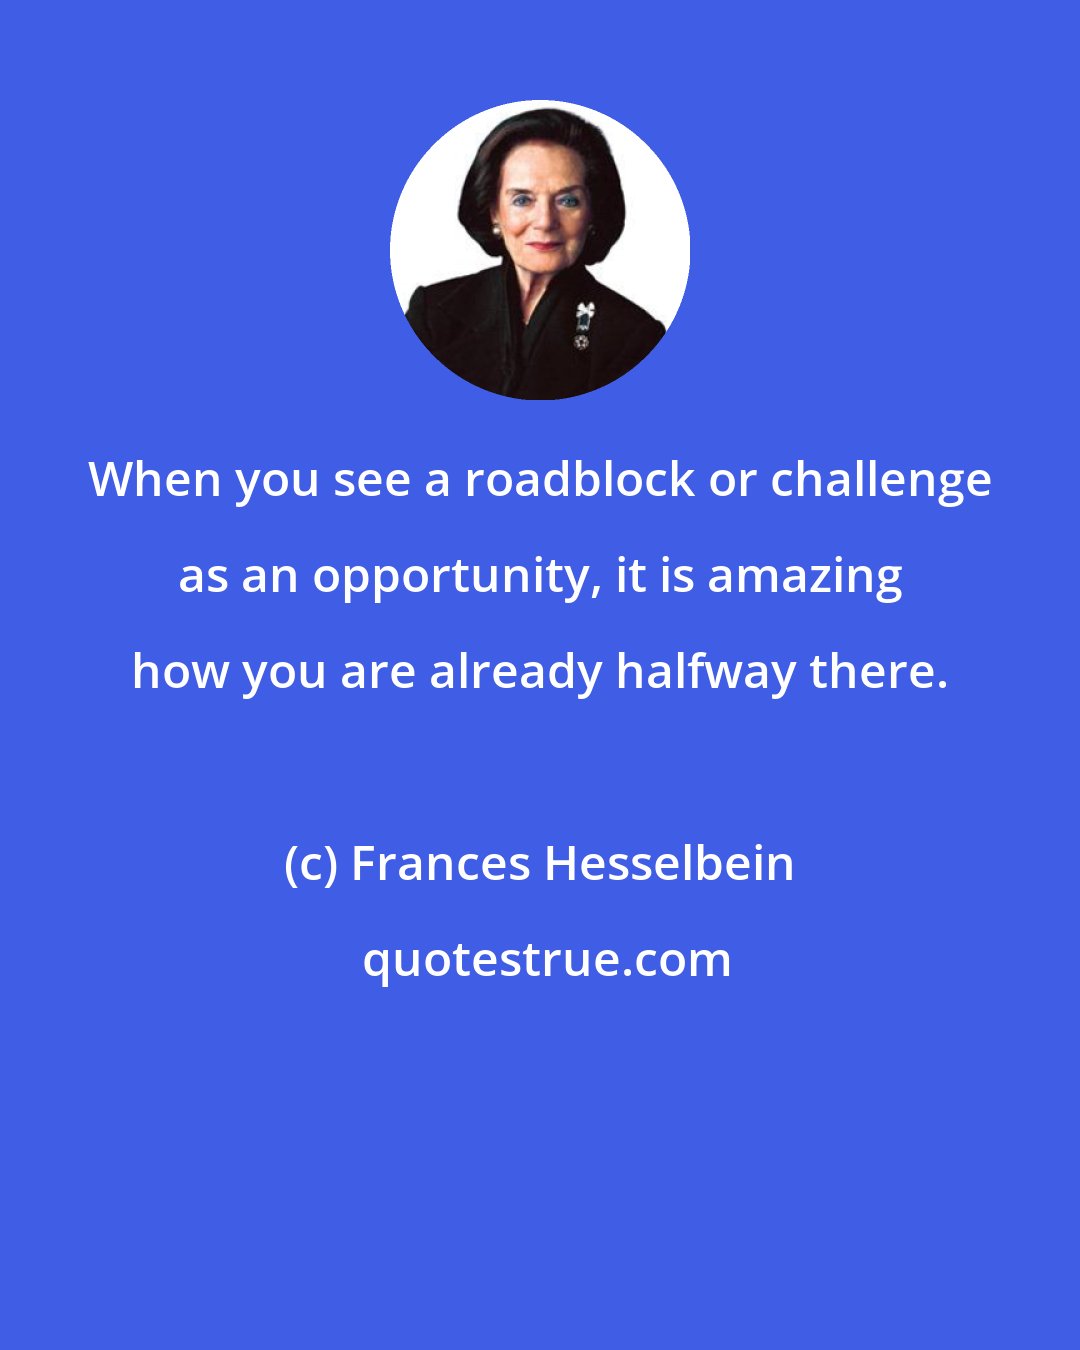 Frances Hesselbein: When you see a roadblock or challenge as an opportunity, it is amazing how you are already halfway there.